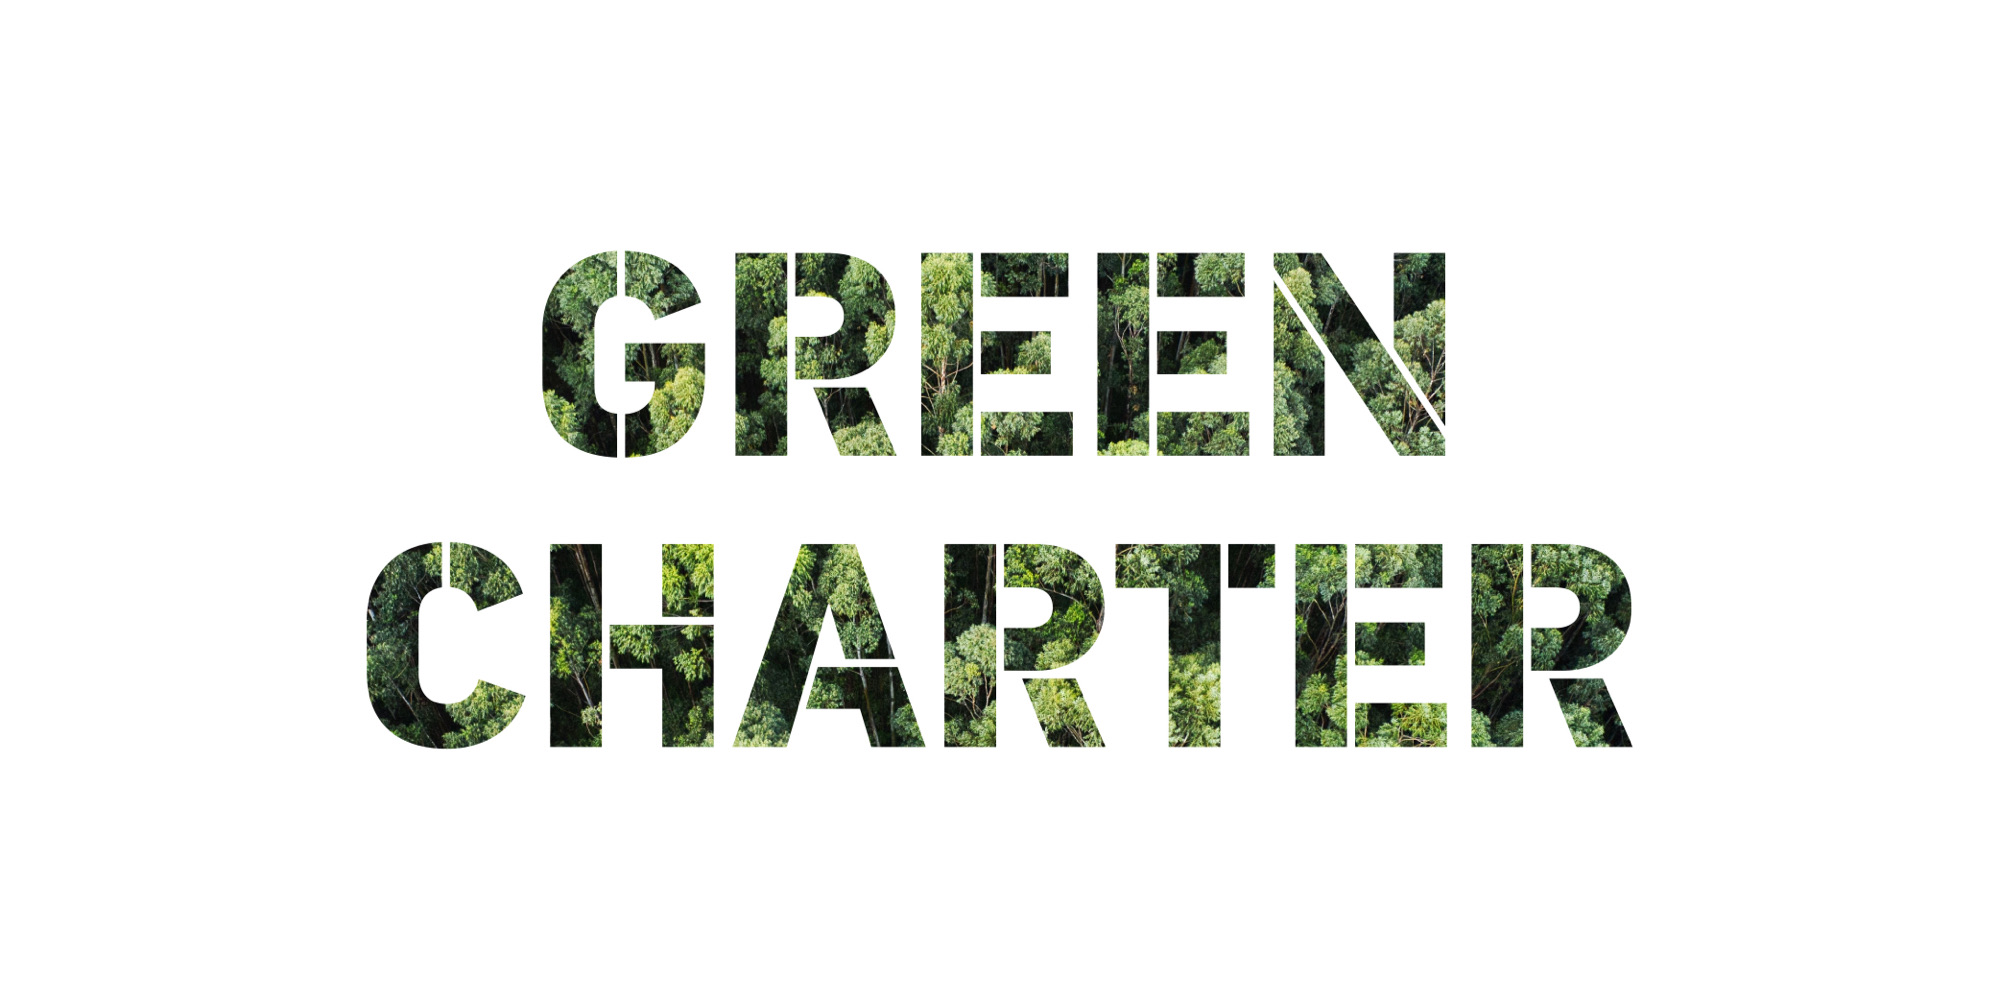 Text "Green Charter" cut from a photo of a forest canopy.